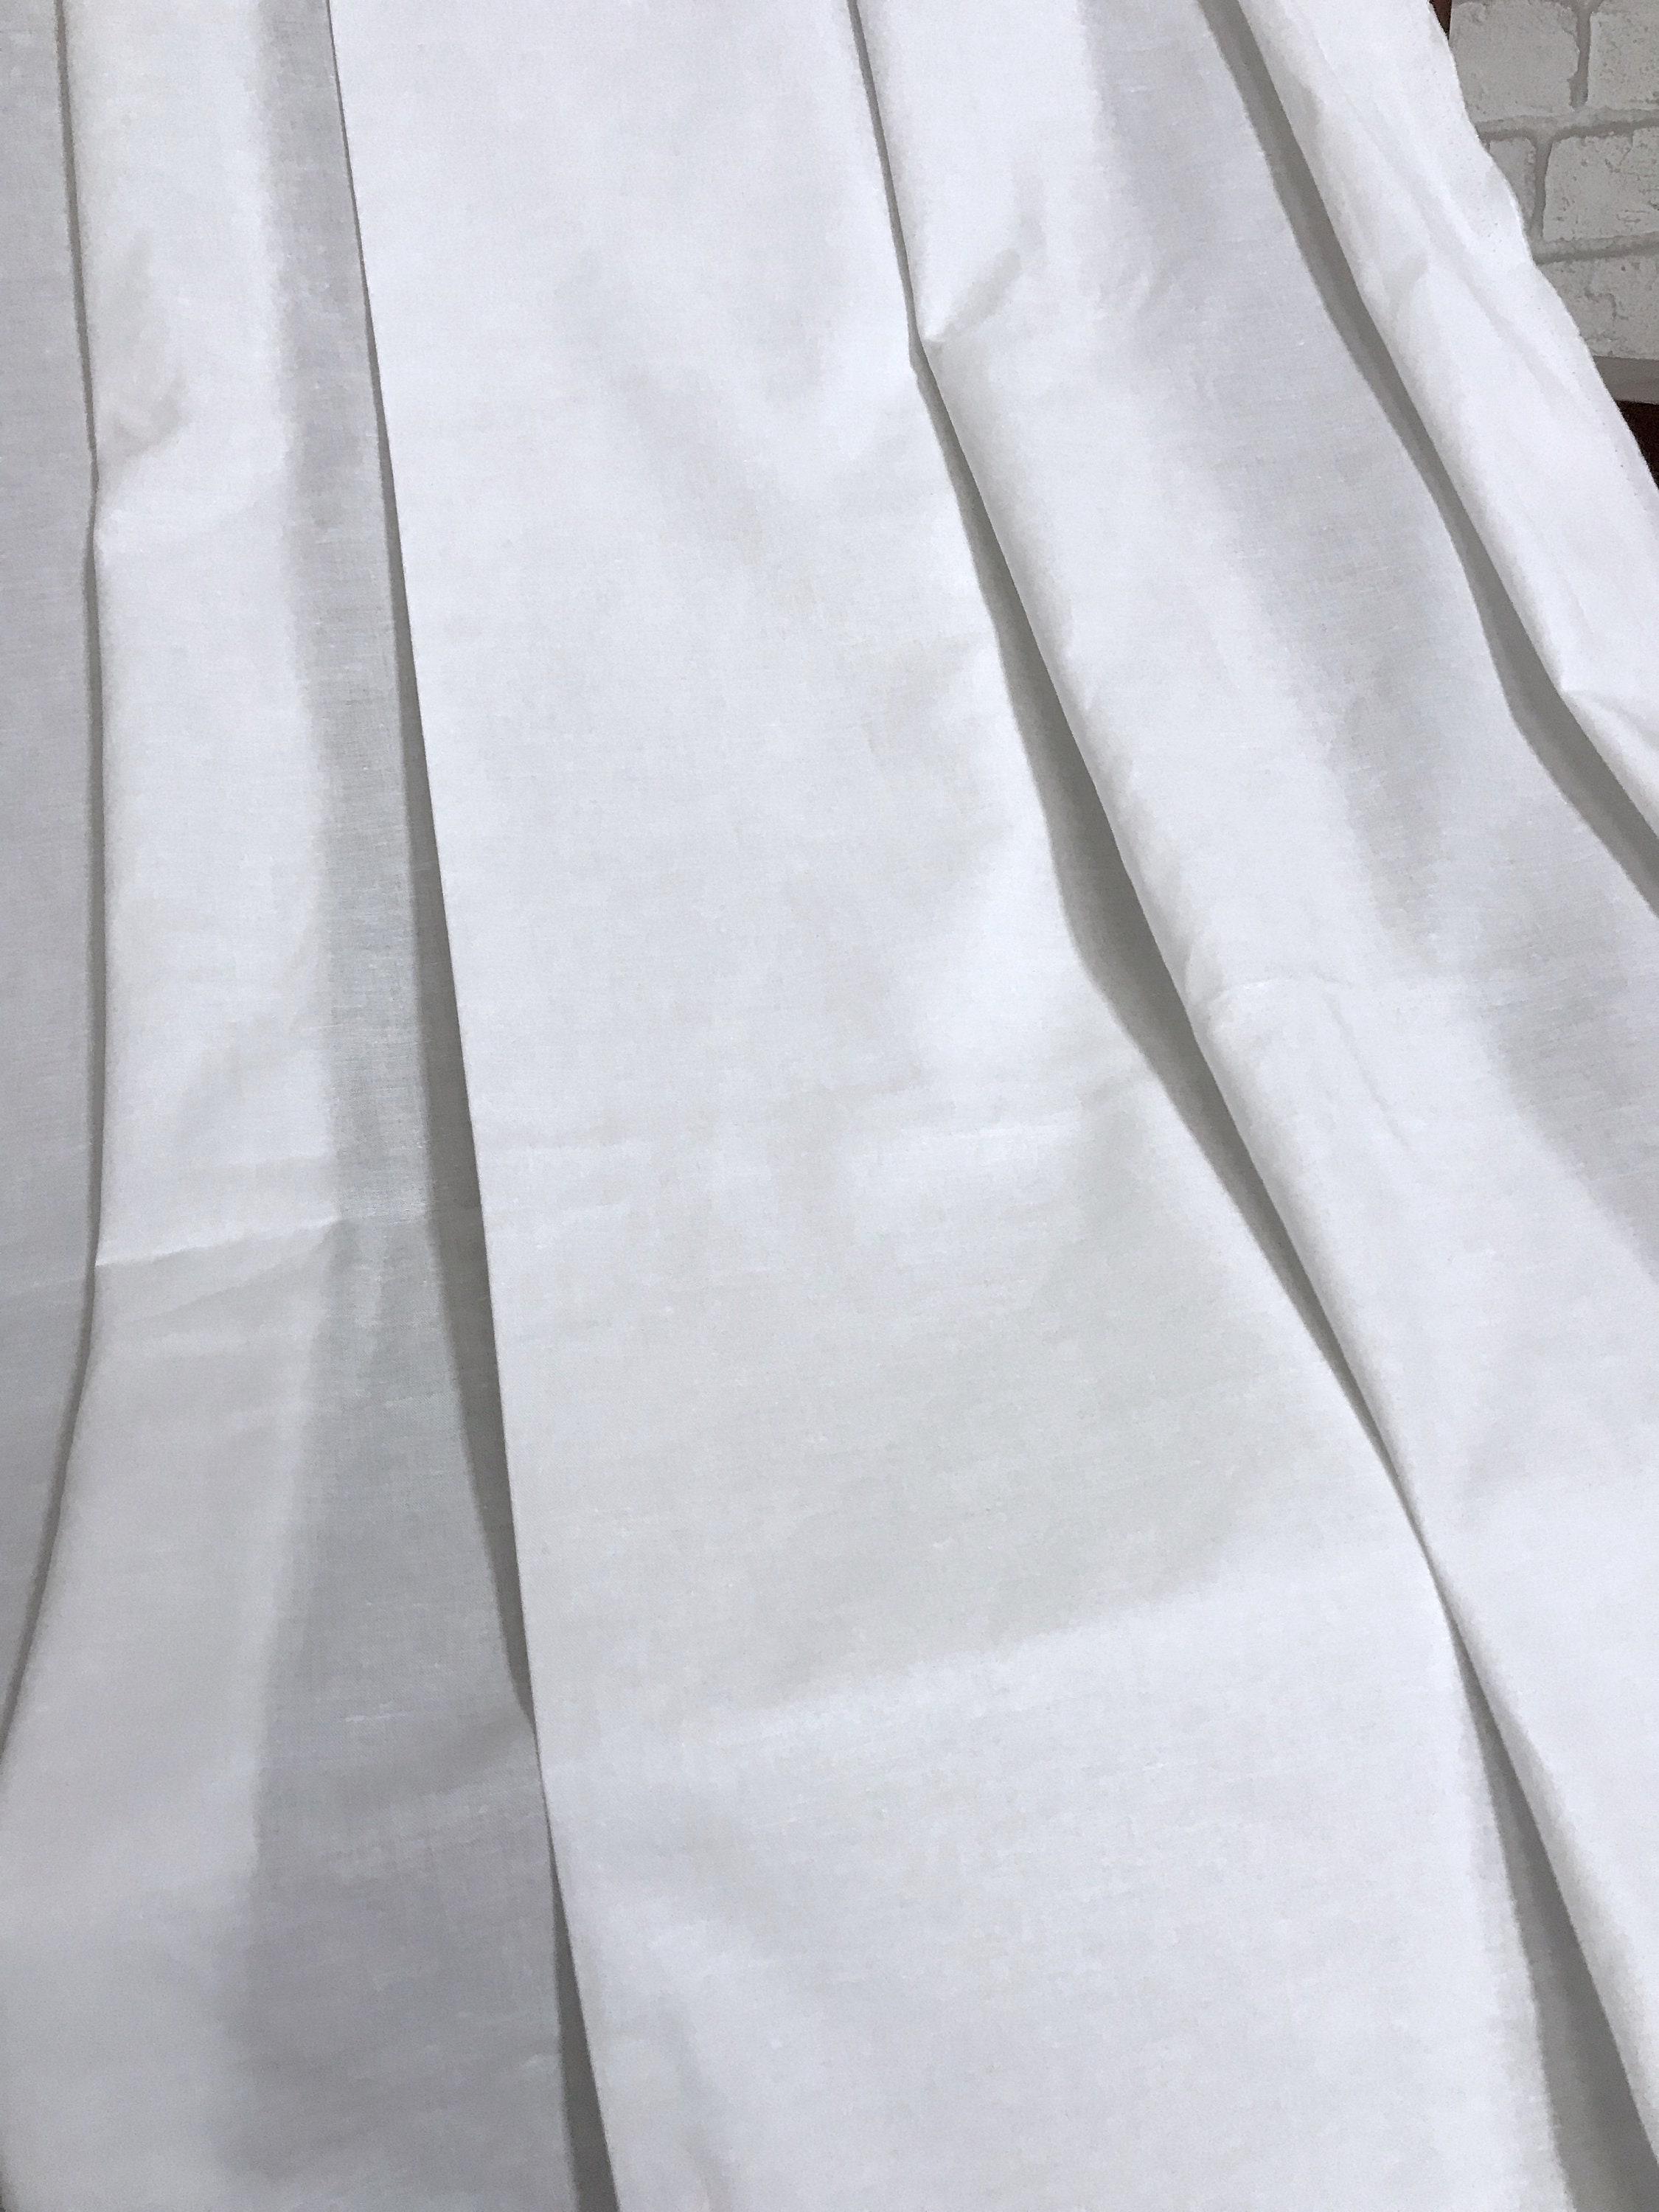 50% OFF White Cotton fabric White 58 Wide 100 percent | Etsy